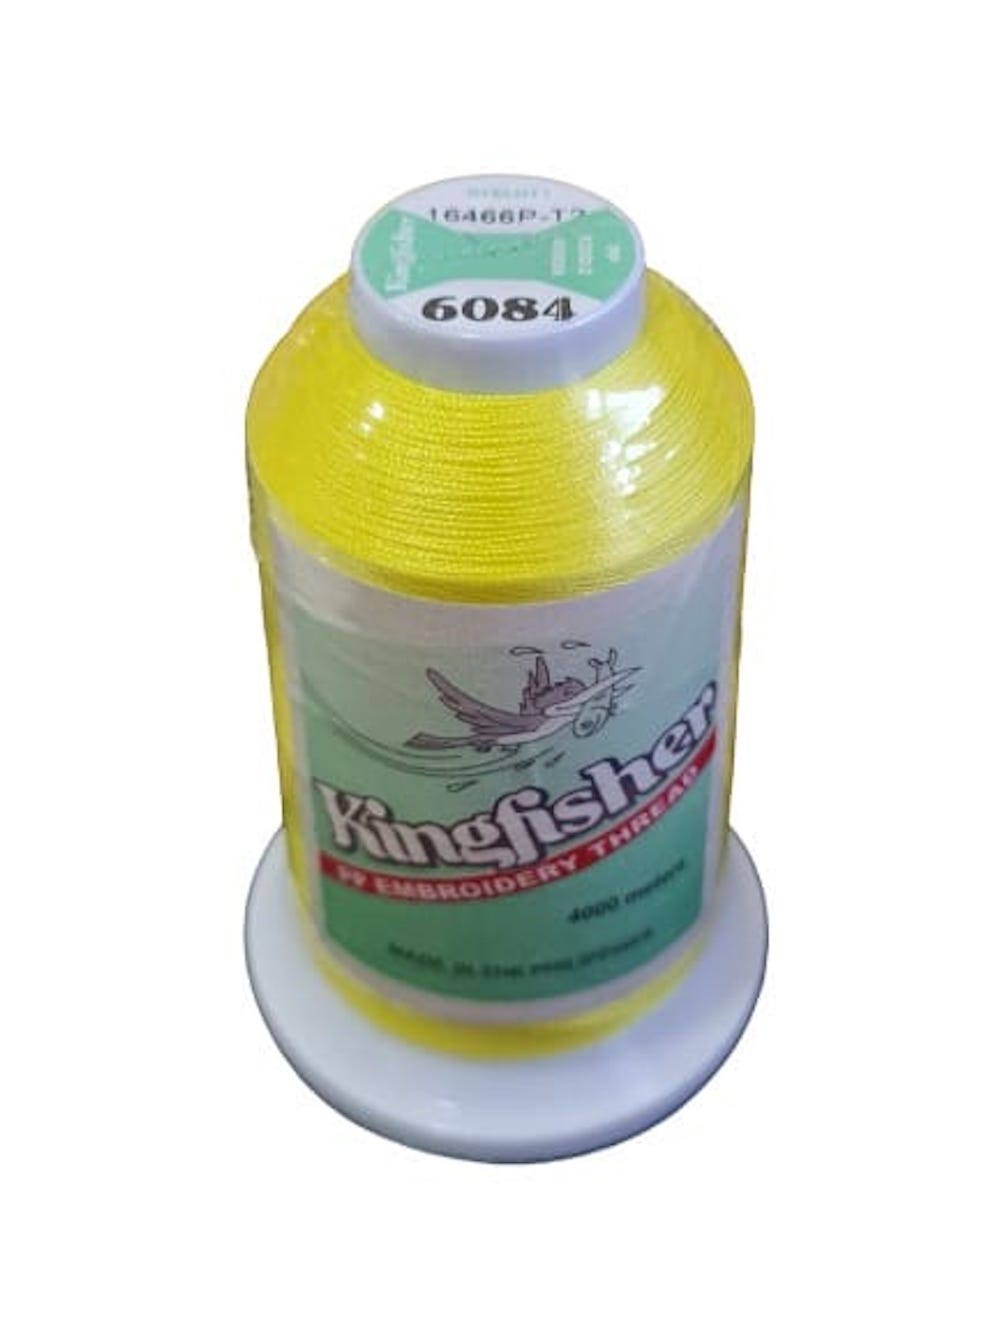 King Fisher Embroidery Thread 4000m 6084 - MY SEWING MALL